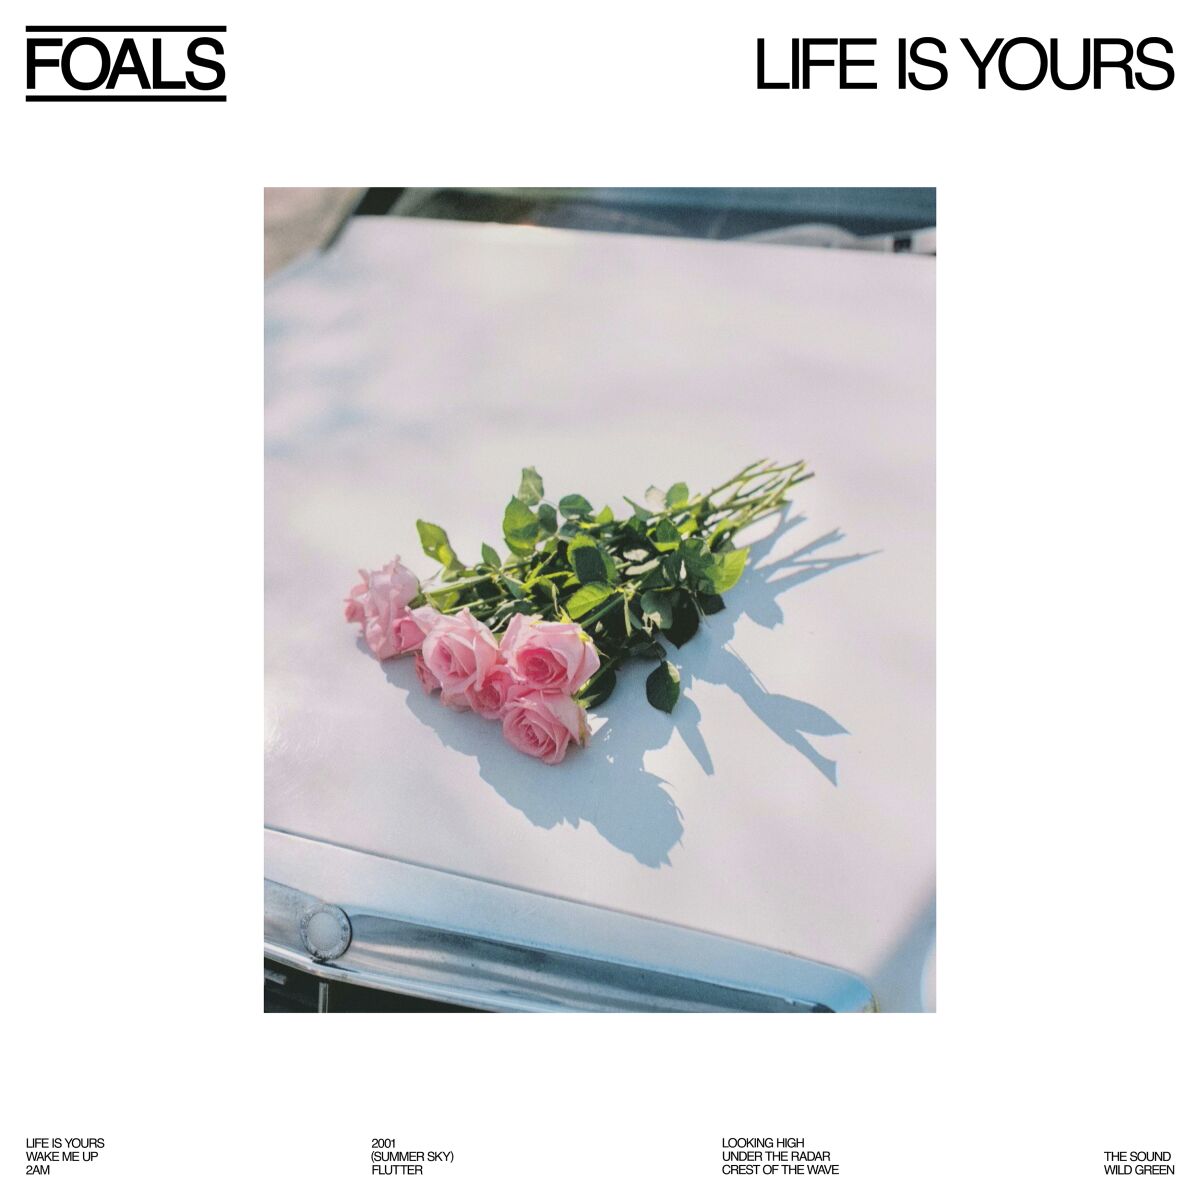 This image released by Warner Records shows "Life Is Yours" by Foals. (Warner Records via AP)